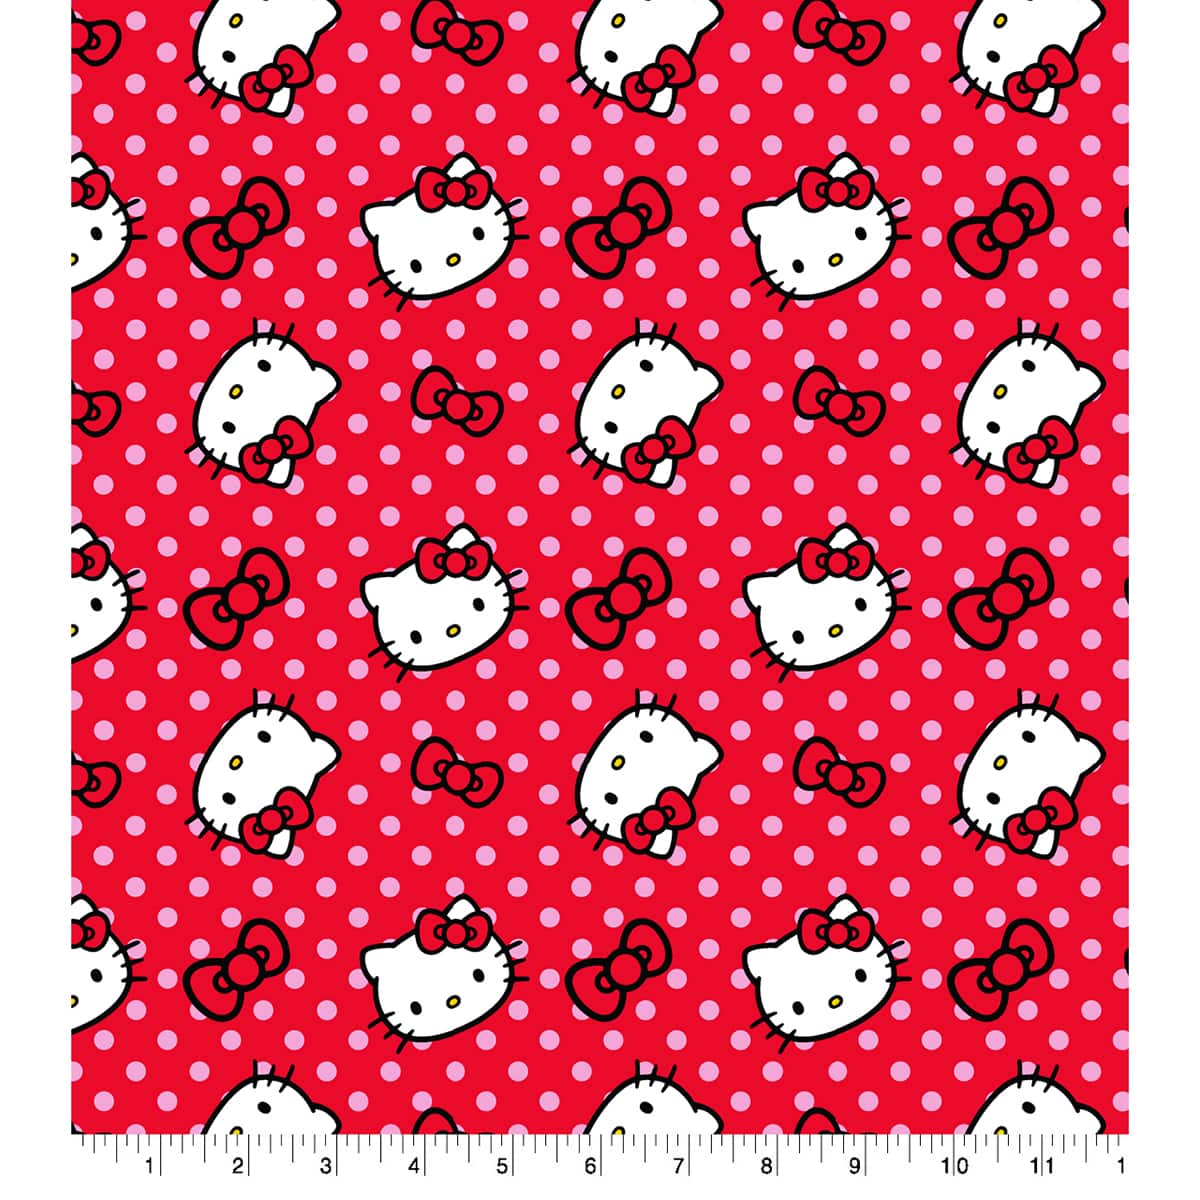 Hello Kitty fabric -- Hello Kitty, bows, and pink polka dots on red -- 100%  cotton quilting fabric